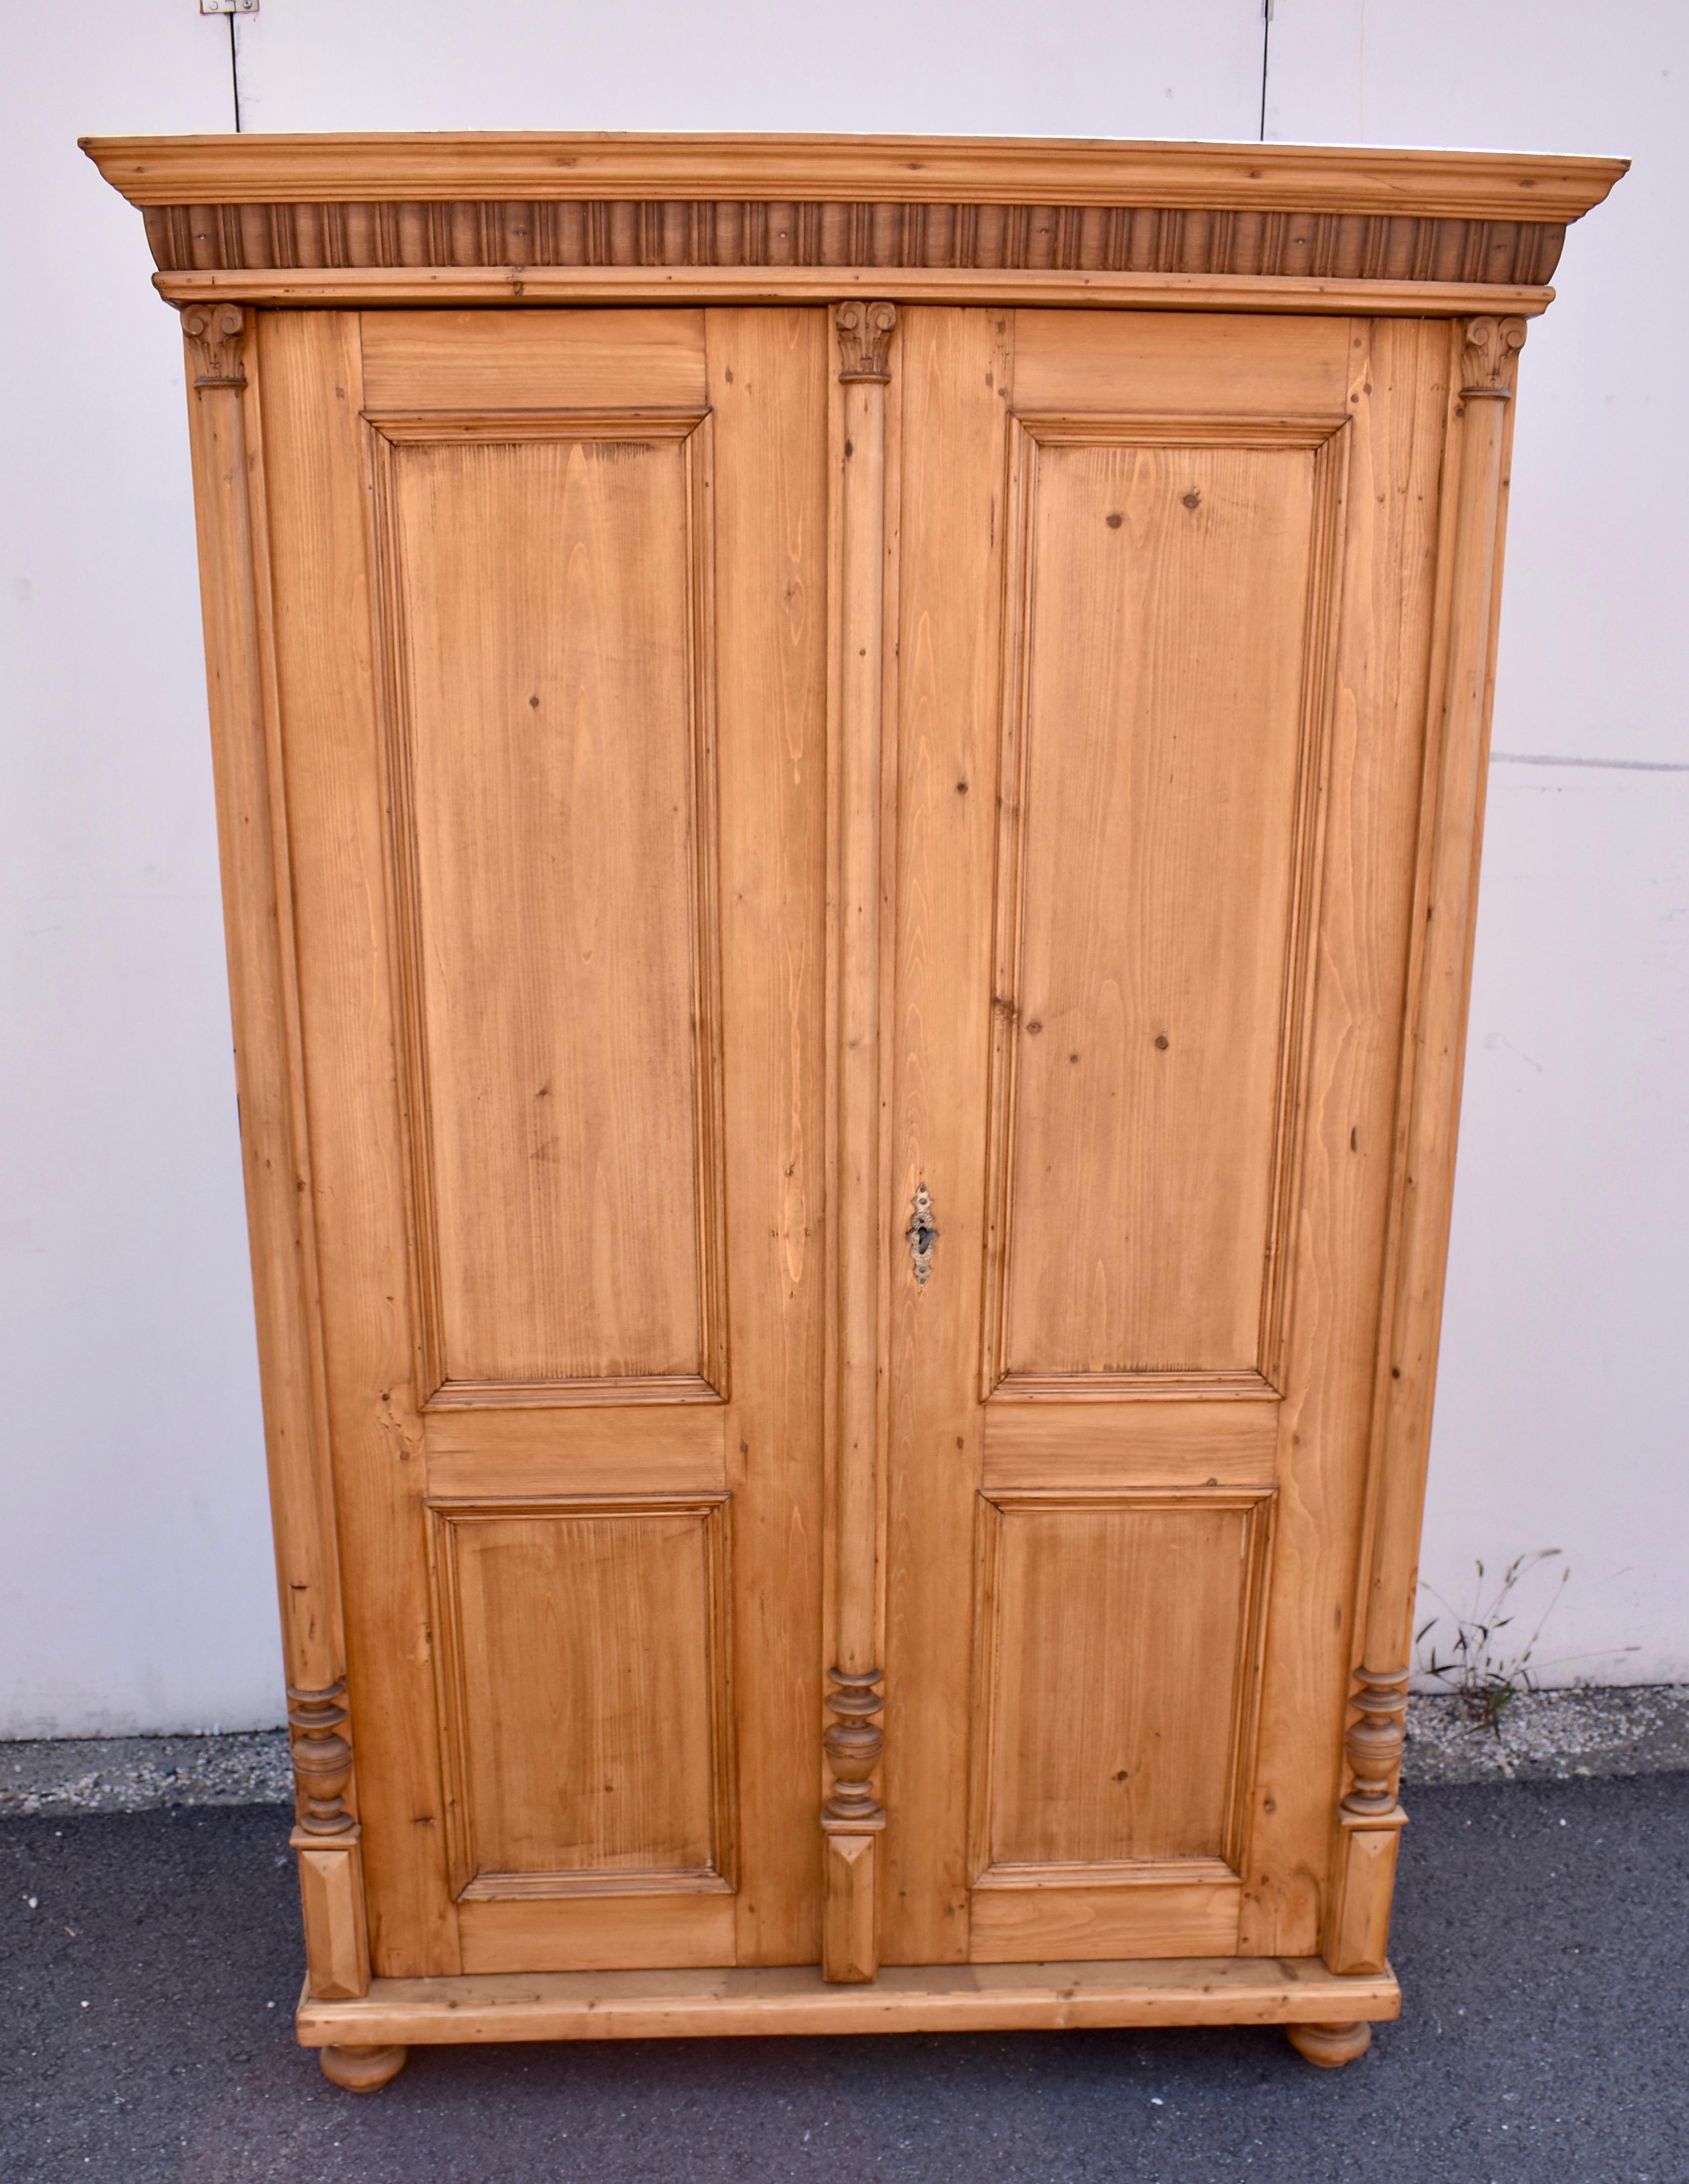 The crown of this good-looking two door armoire is made more attractive by the contrast between the pine crown molding and the hardwood gadrooned frieze beneath it.  Each door has a long flat panel with a much shorter one beneath it.  The front